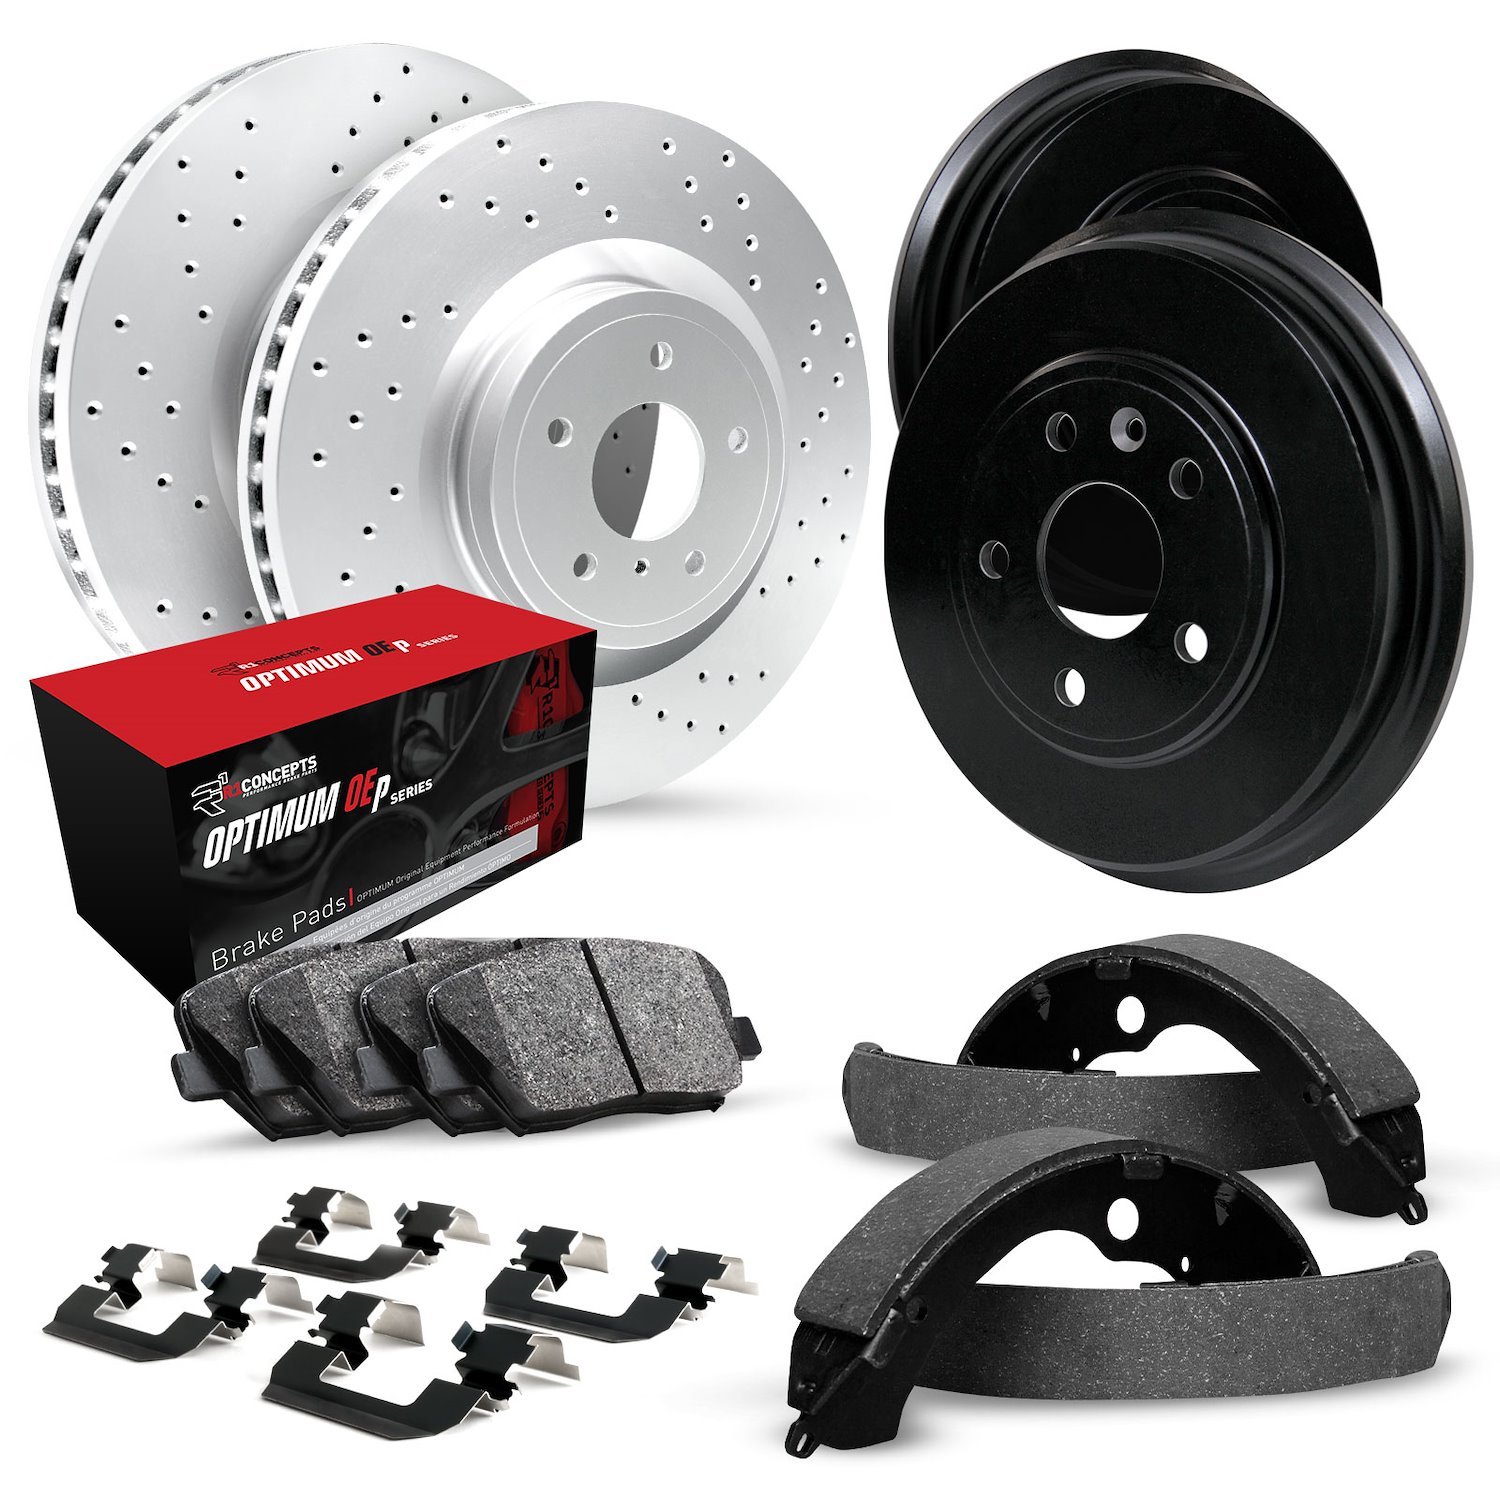 GEO-Carbon Drilled Brake Rotor & Drum Set w/Optimum OE Pads, Shoes, & Hardware, 1988-1991 GM, Position: Front & Rear